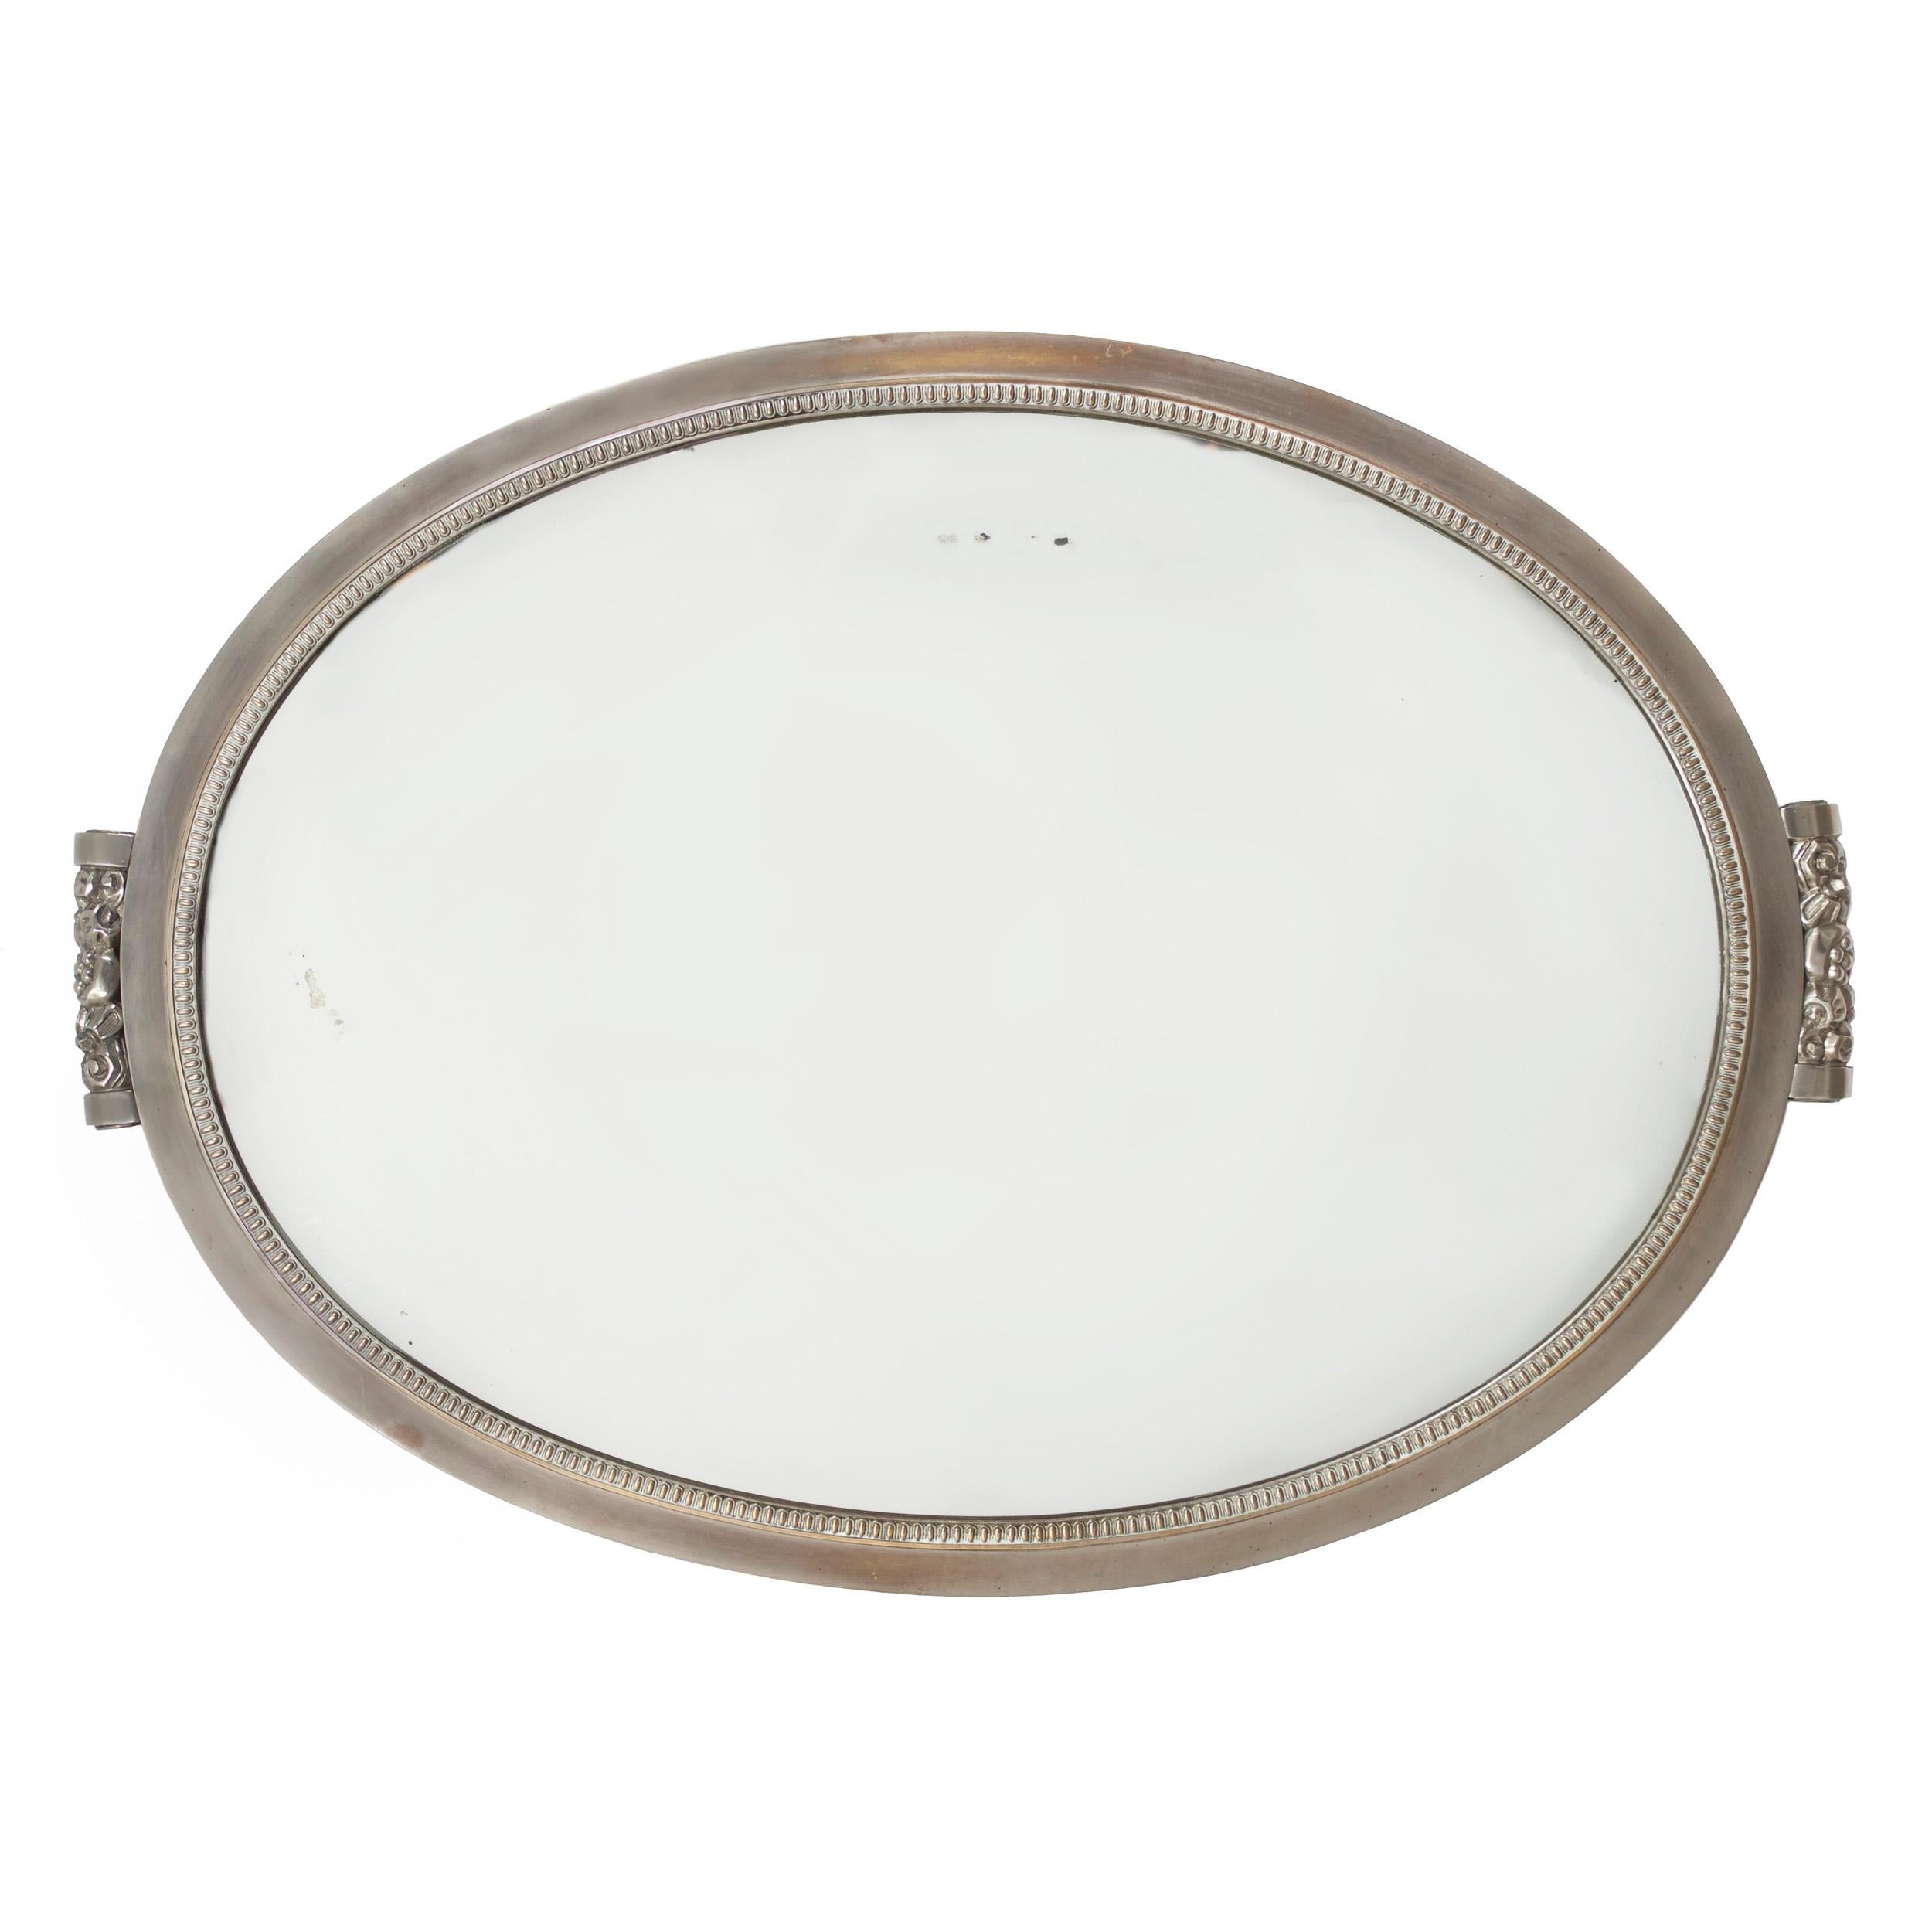 A superb Art Deco wall mirror, it features a nickel-plated steel frame surrounding an ovular mirrored glass with cast steel floral motifs affixed top and bottom with machined screws. It is designed to be hung either vertically or